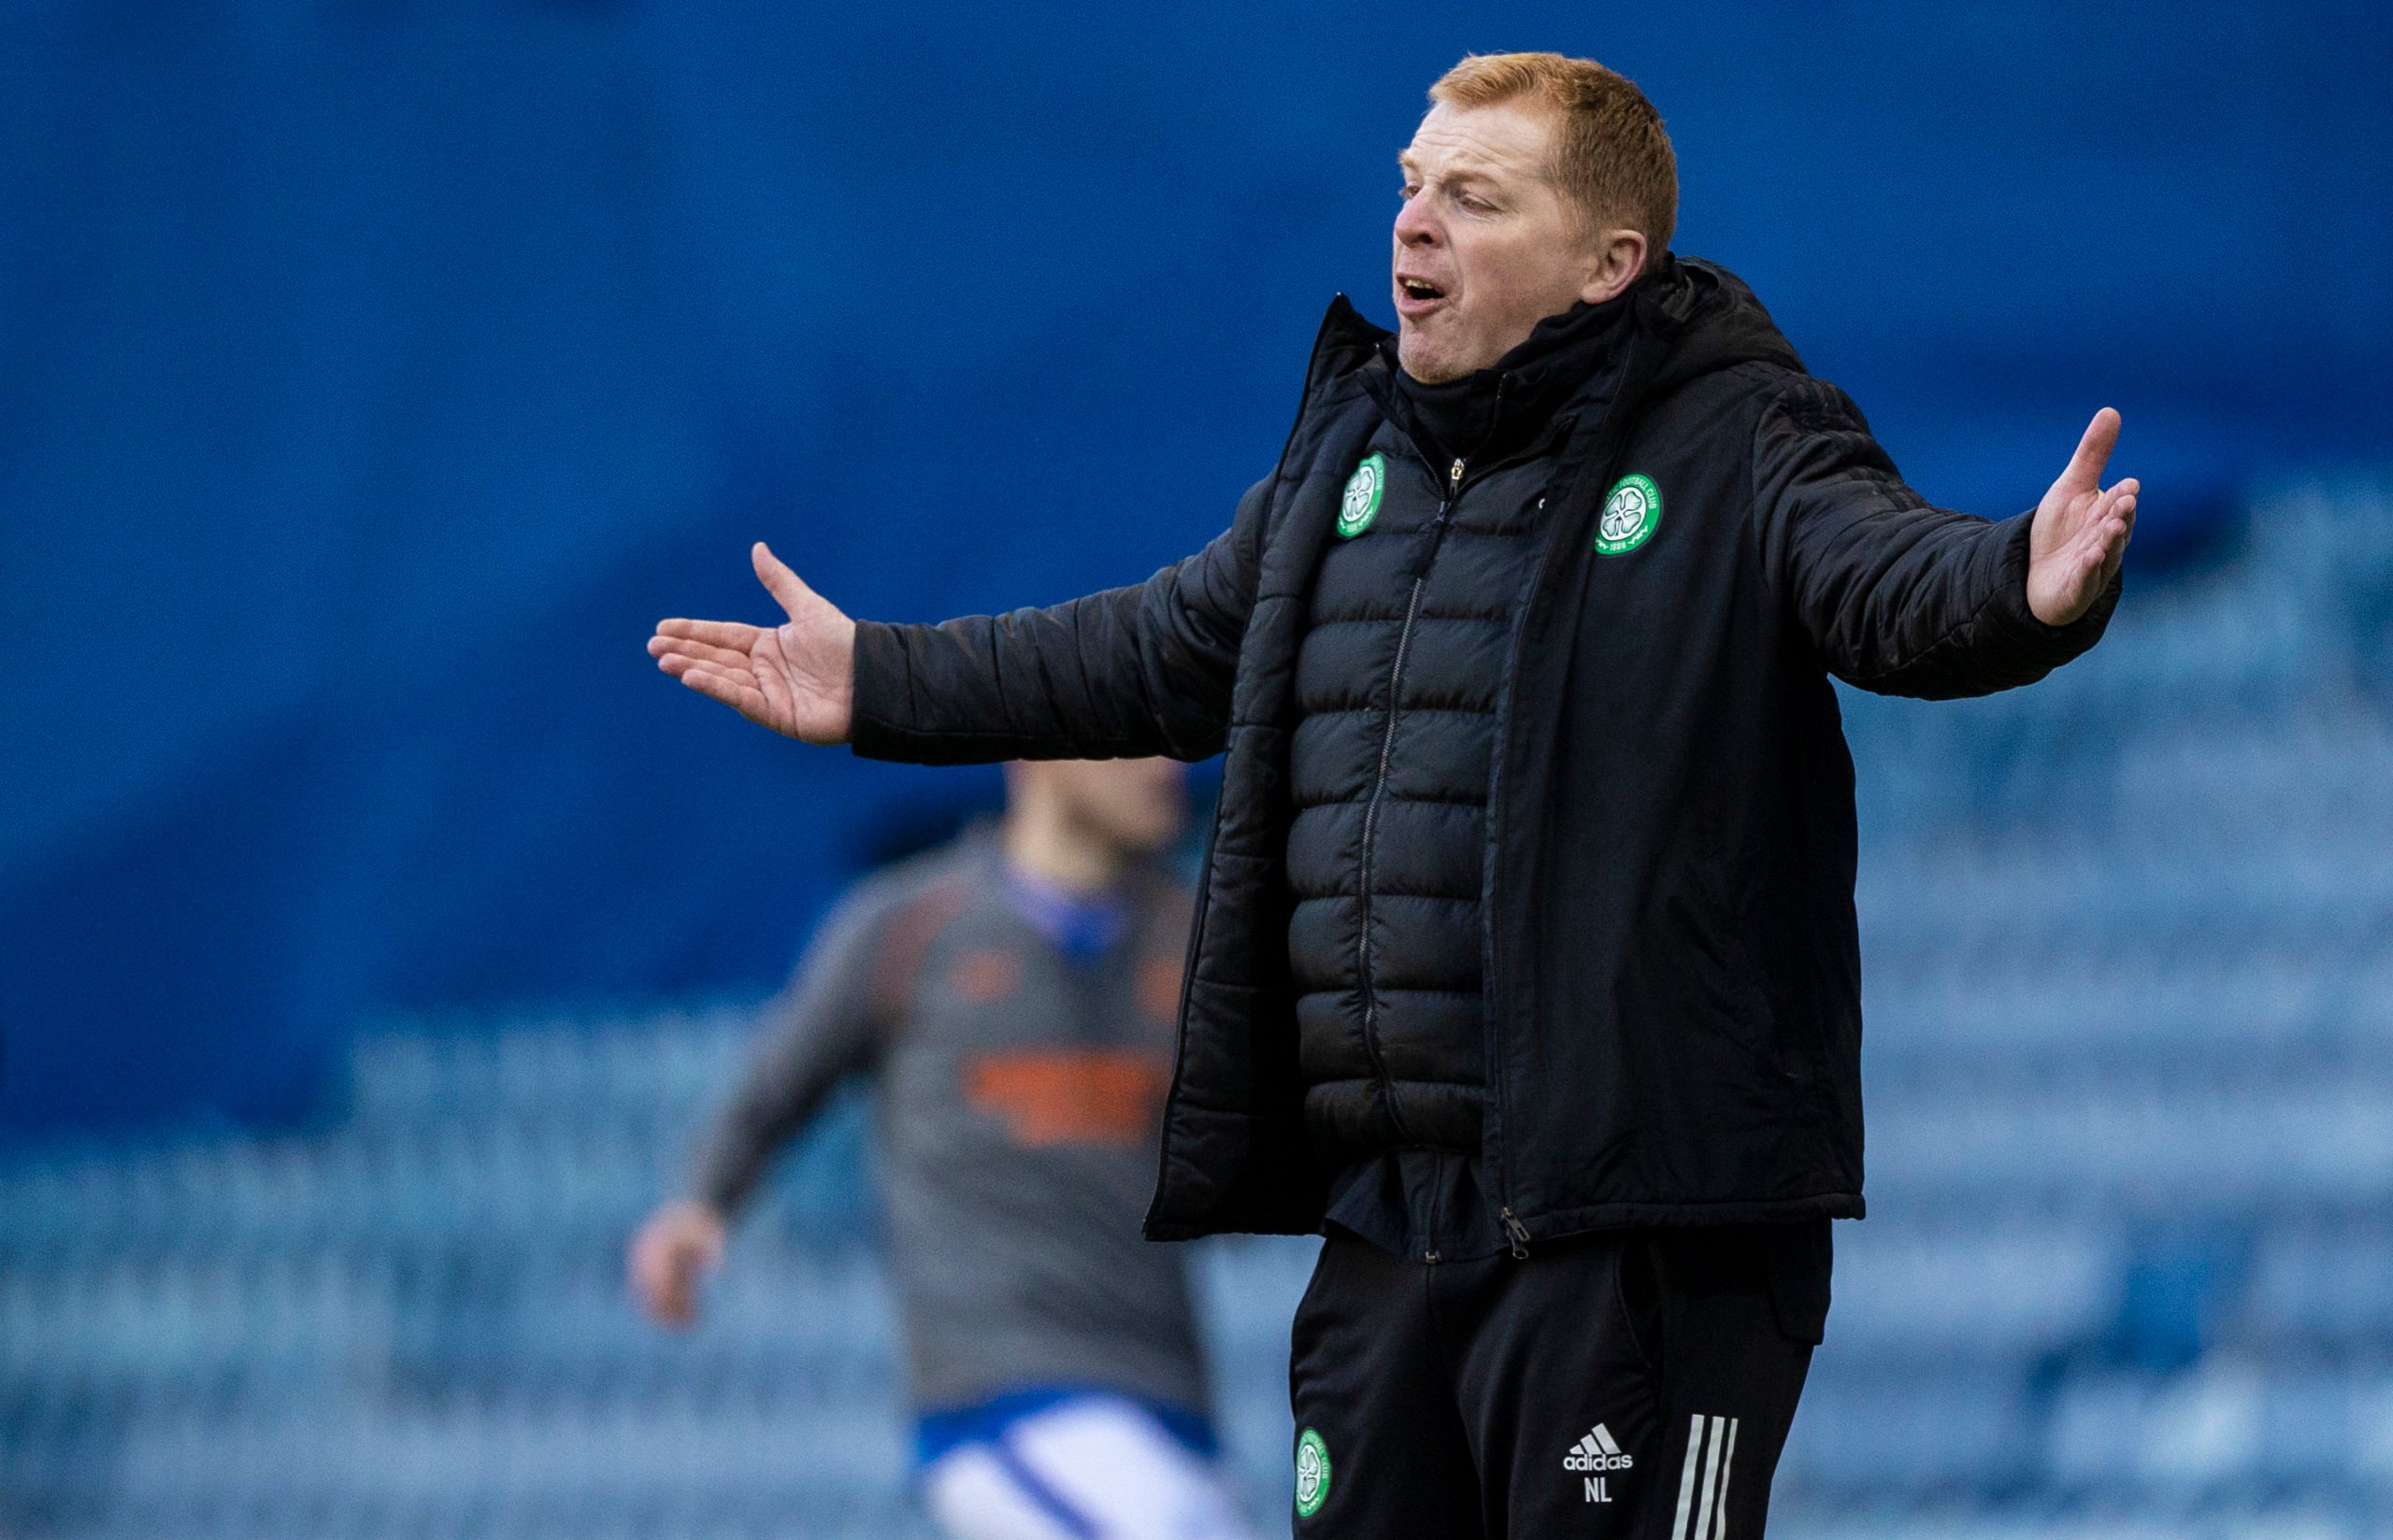 Celtic manager Neil Lennon criticised St. Johnstone and others